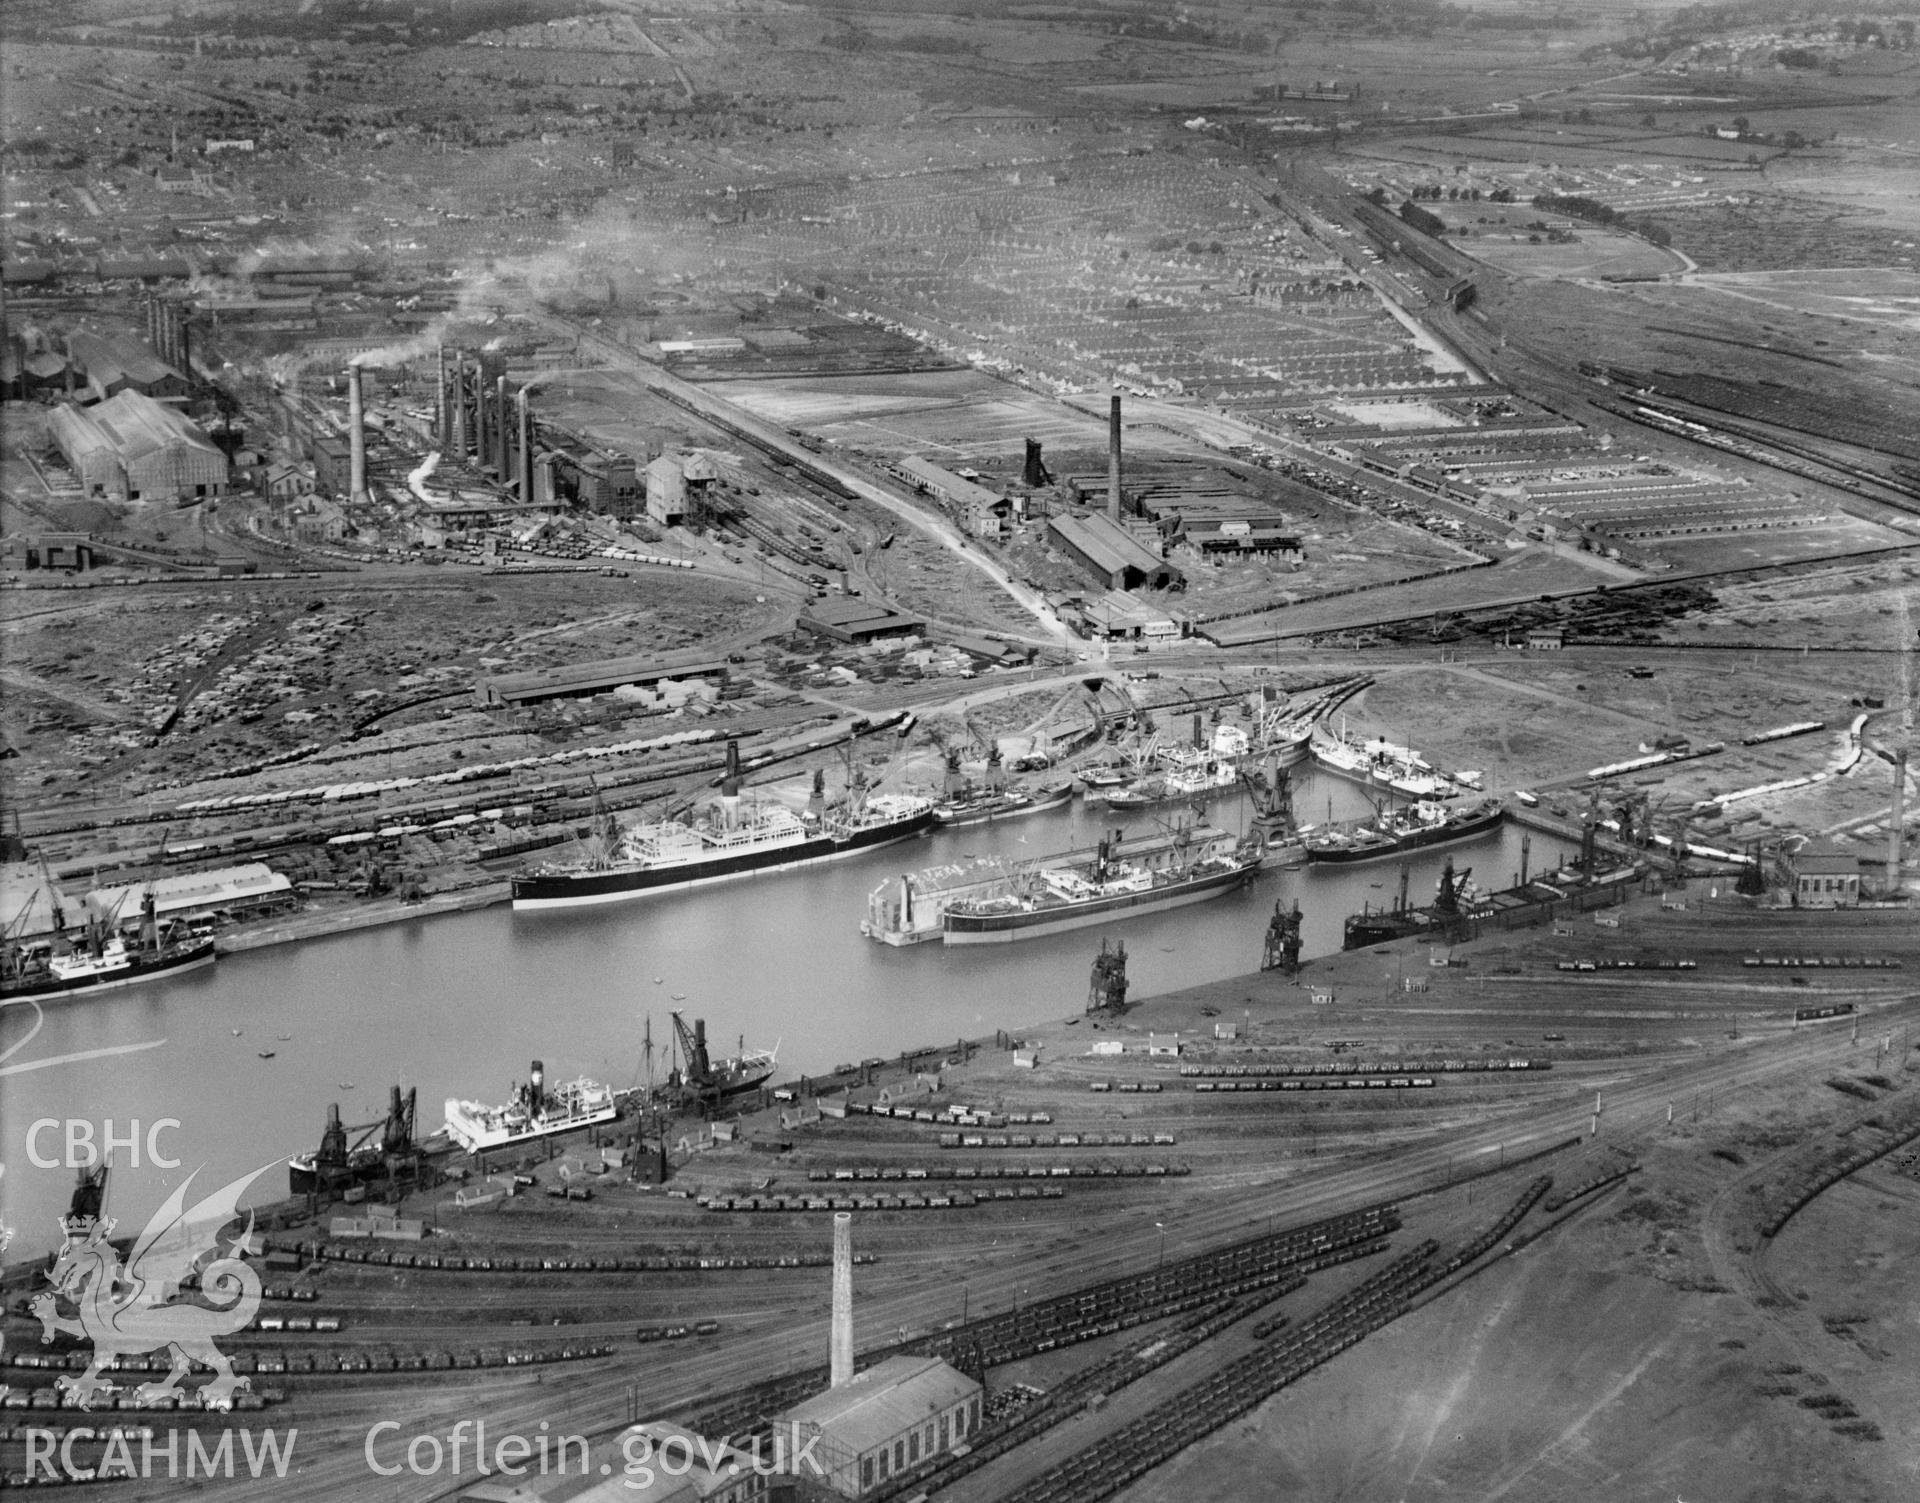 Guest, Keen & Nettleford works, Cardiff, oblique aerial view. 5?x4? black and white glass plate negative.